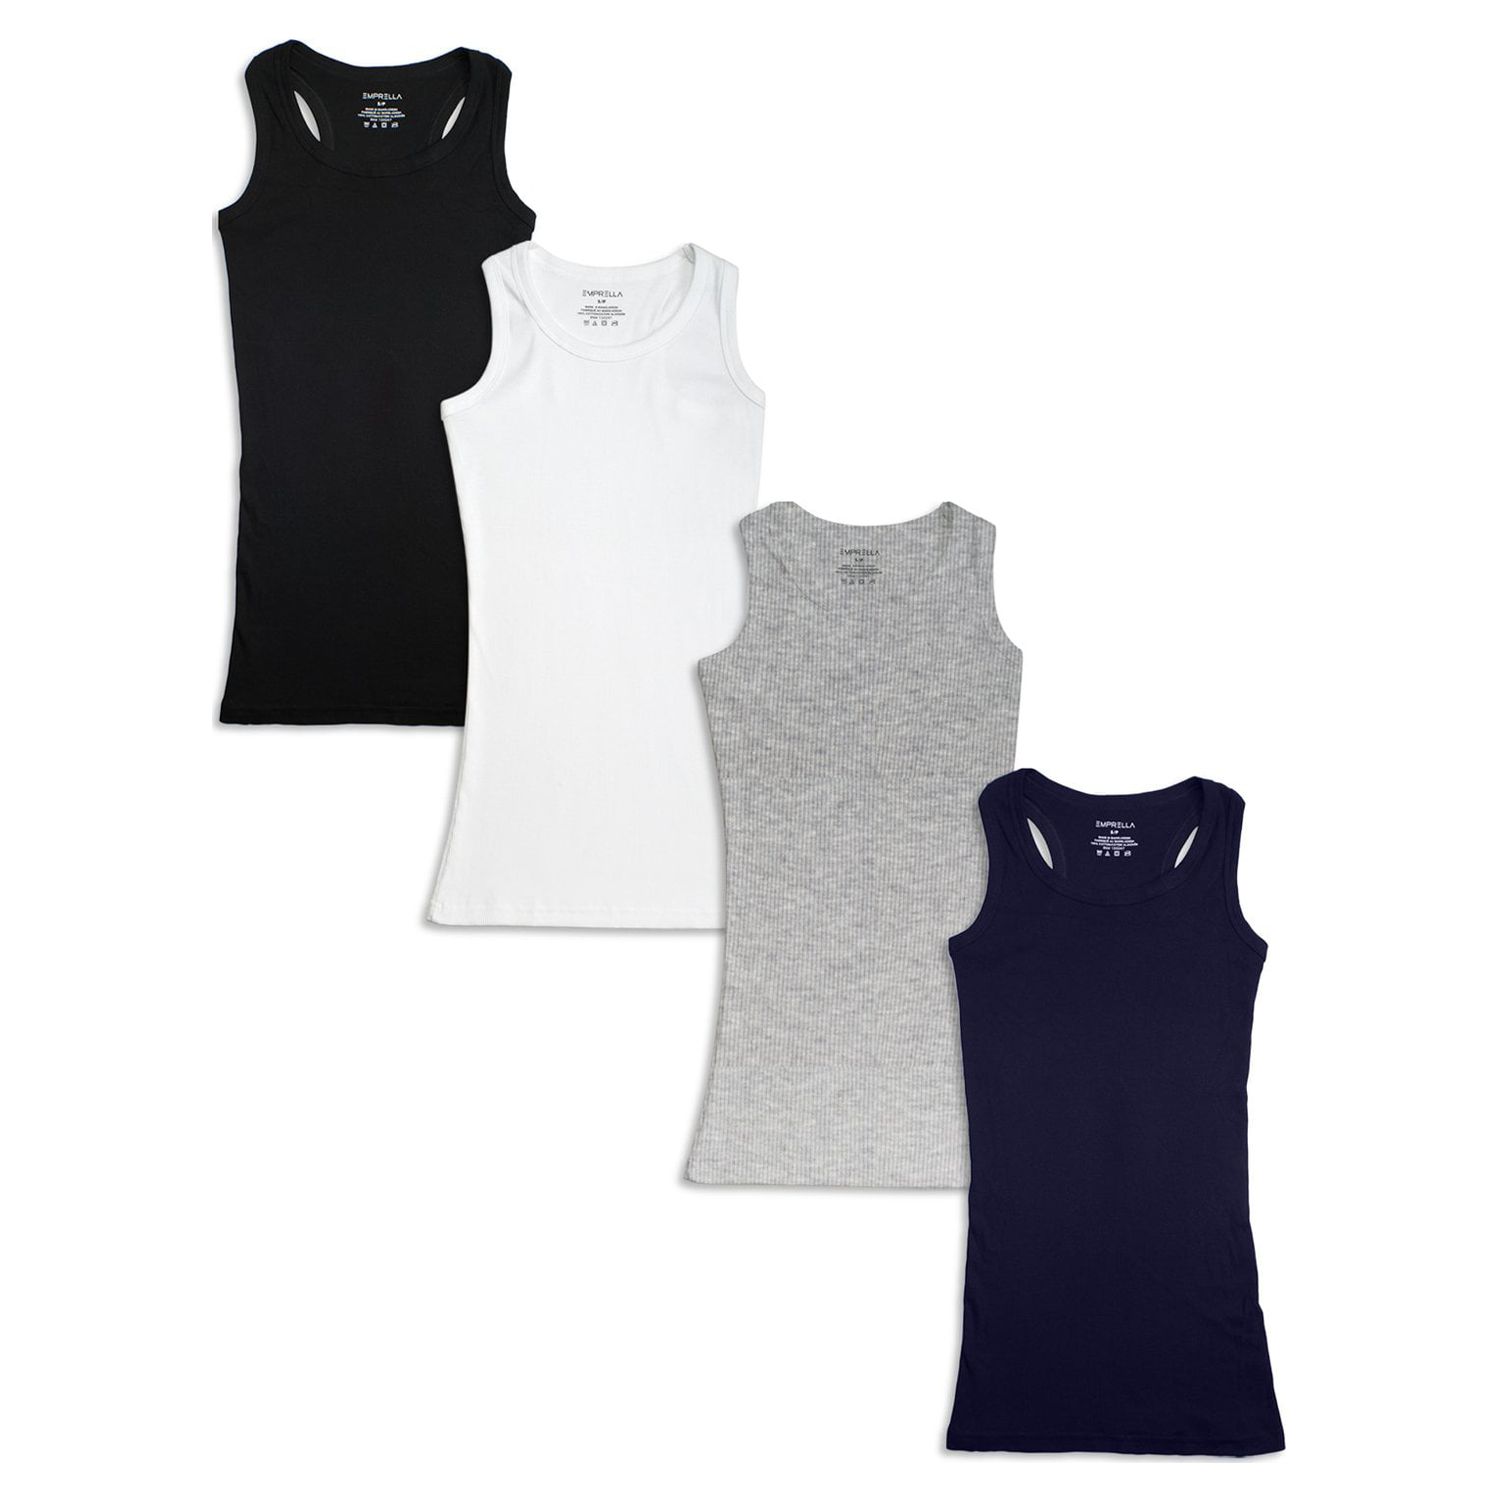 Emprella Tank Tops for Women, 4 Pack Ribbed Racerback Tanks (Small) - image 3 of 4